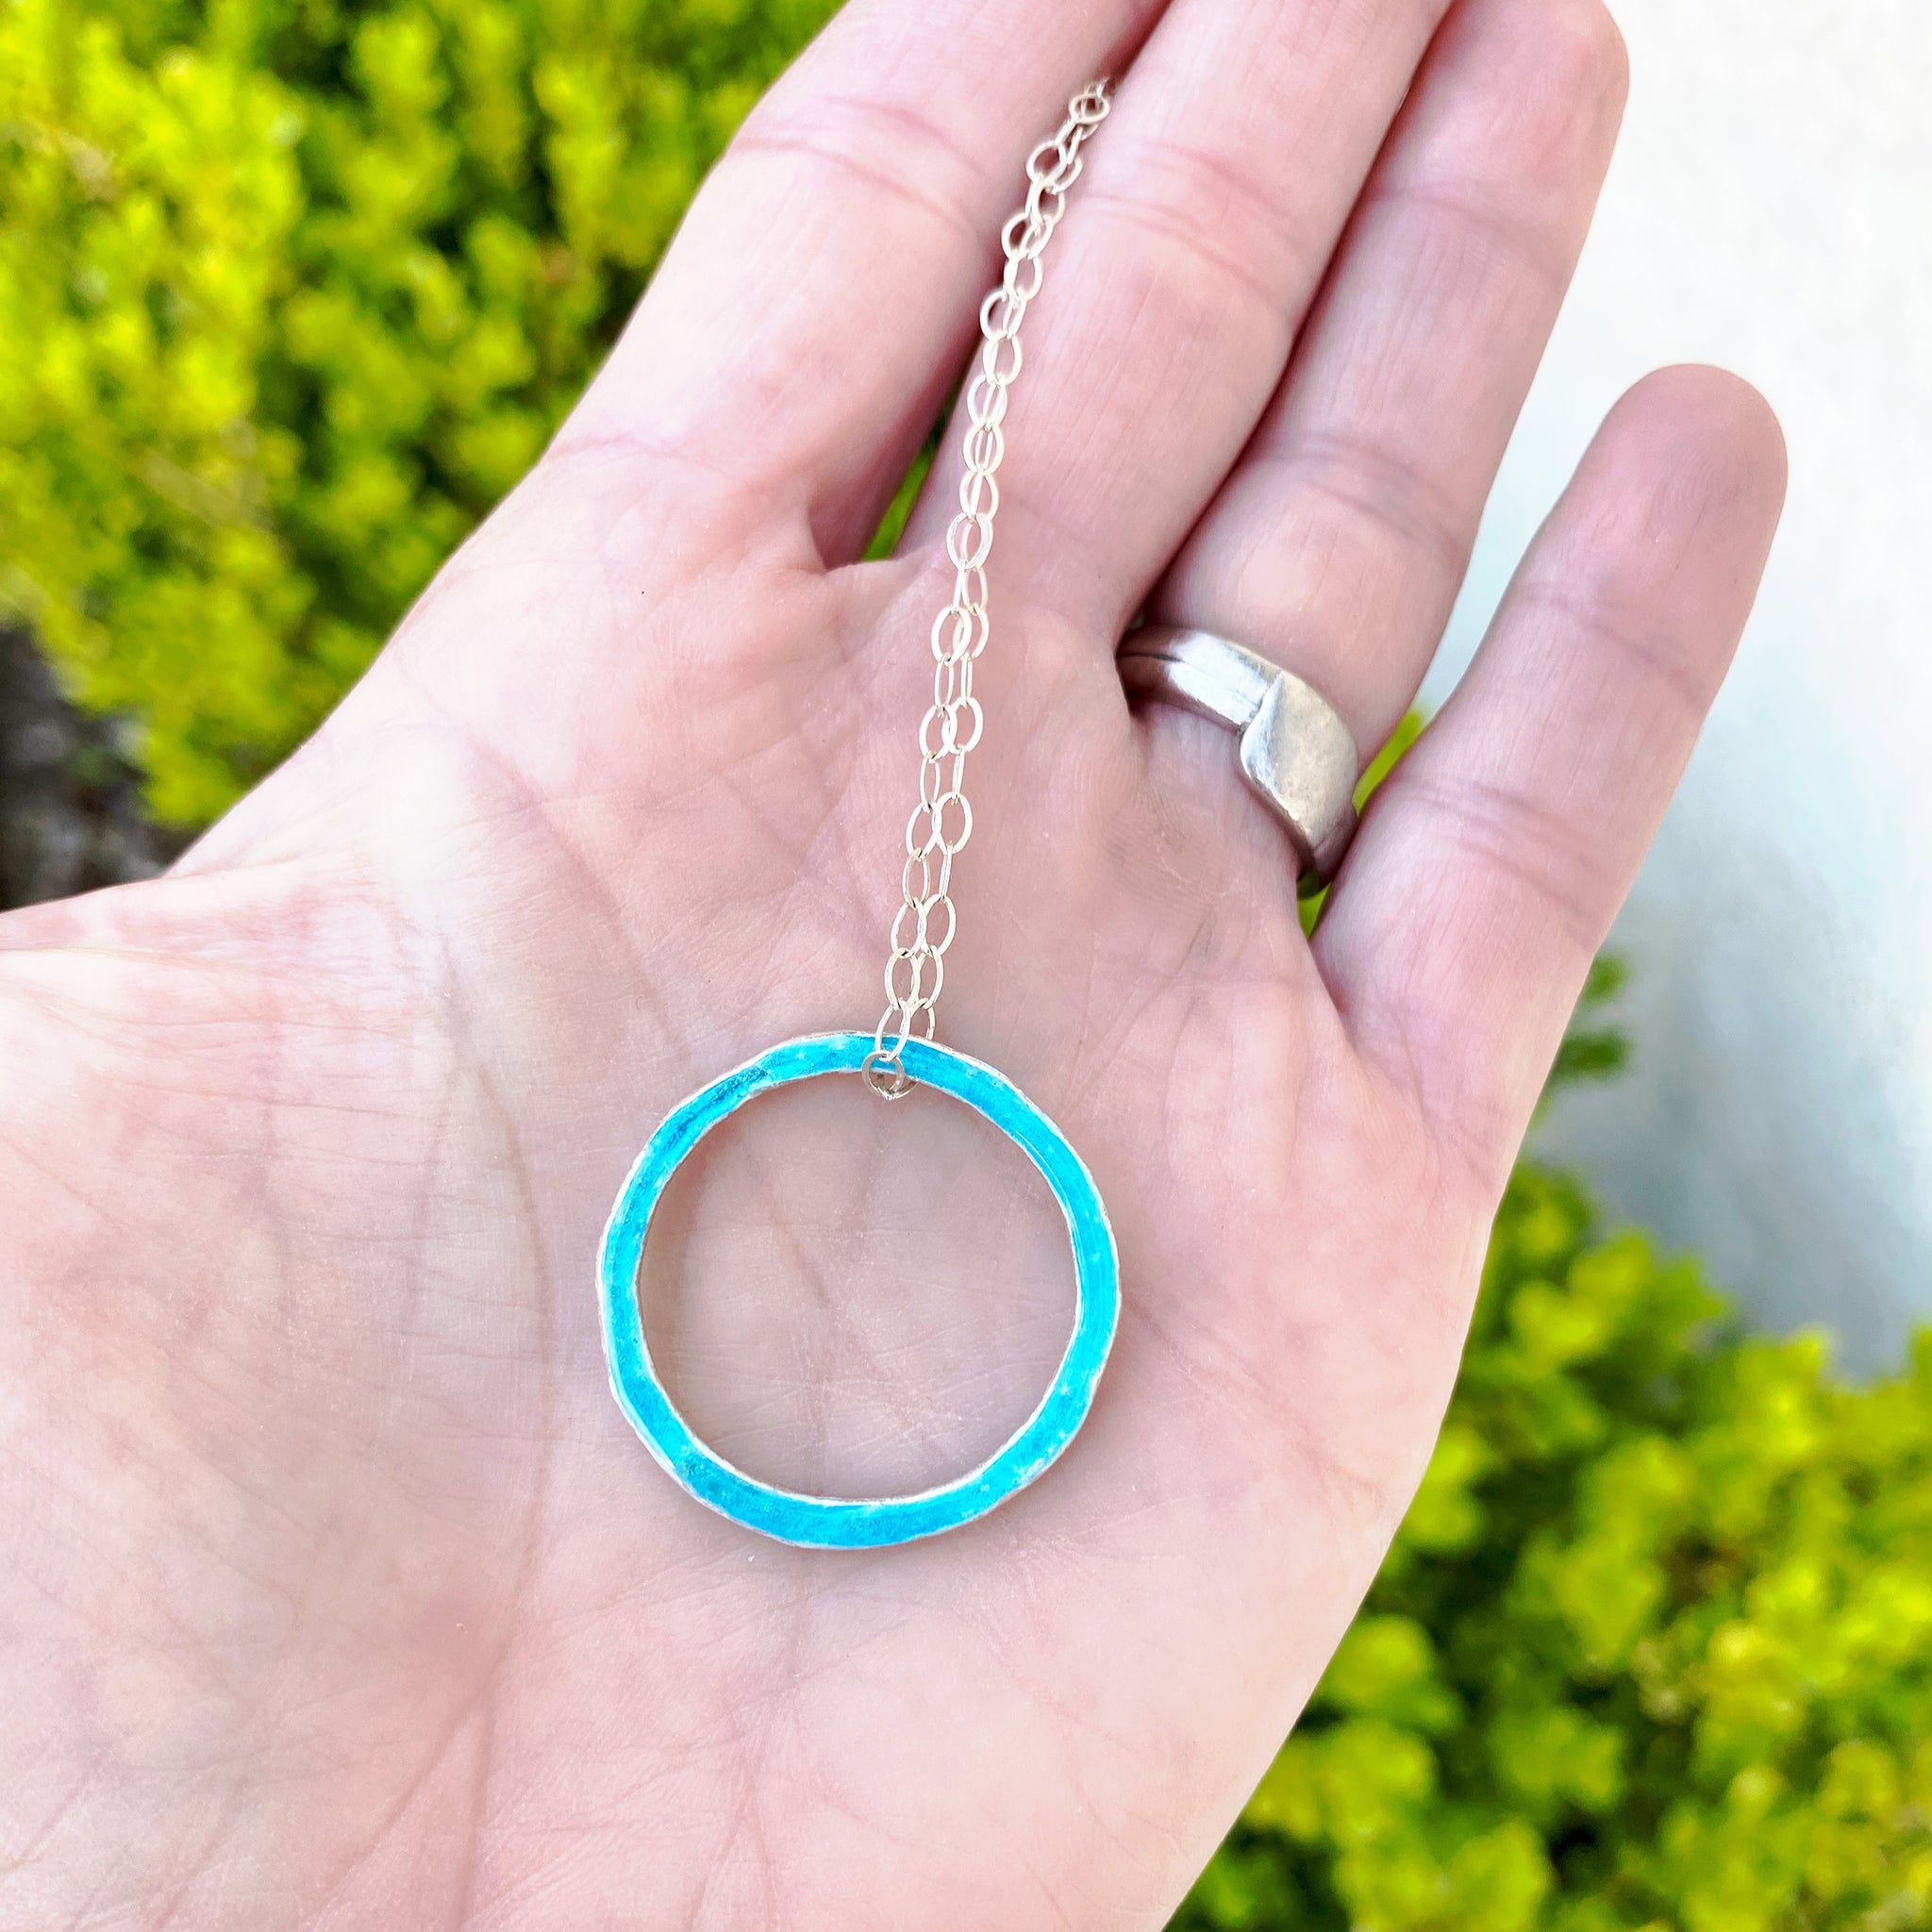 Buy Silver Necklace, Silver Two Circle Necklace, Infinity Necklace, Eternity  Necklace, Interlinked Necklace, Choker Necklace, Gift for Her Online in  India - Etsy